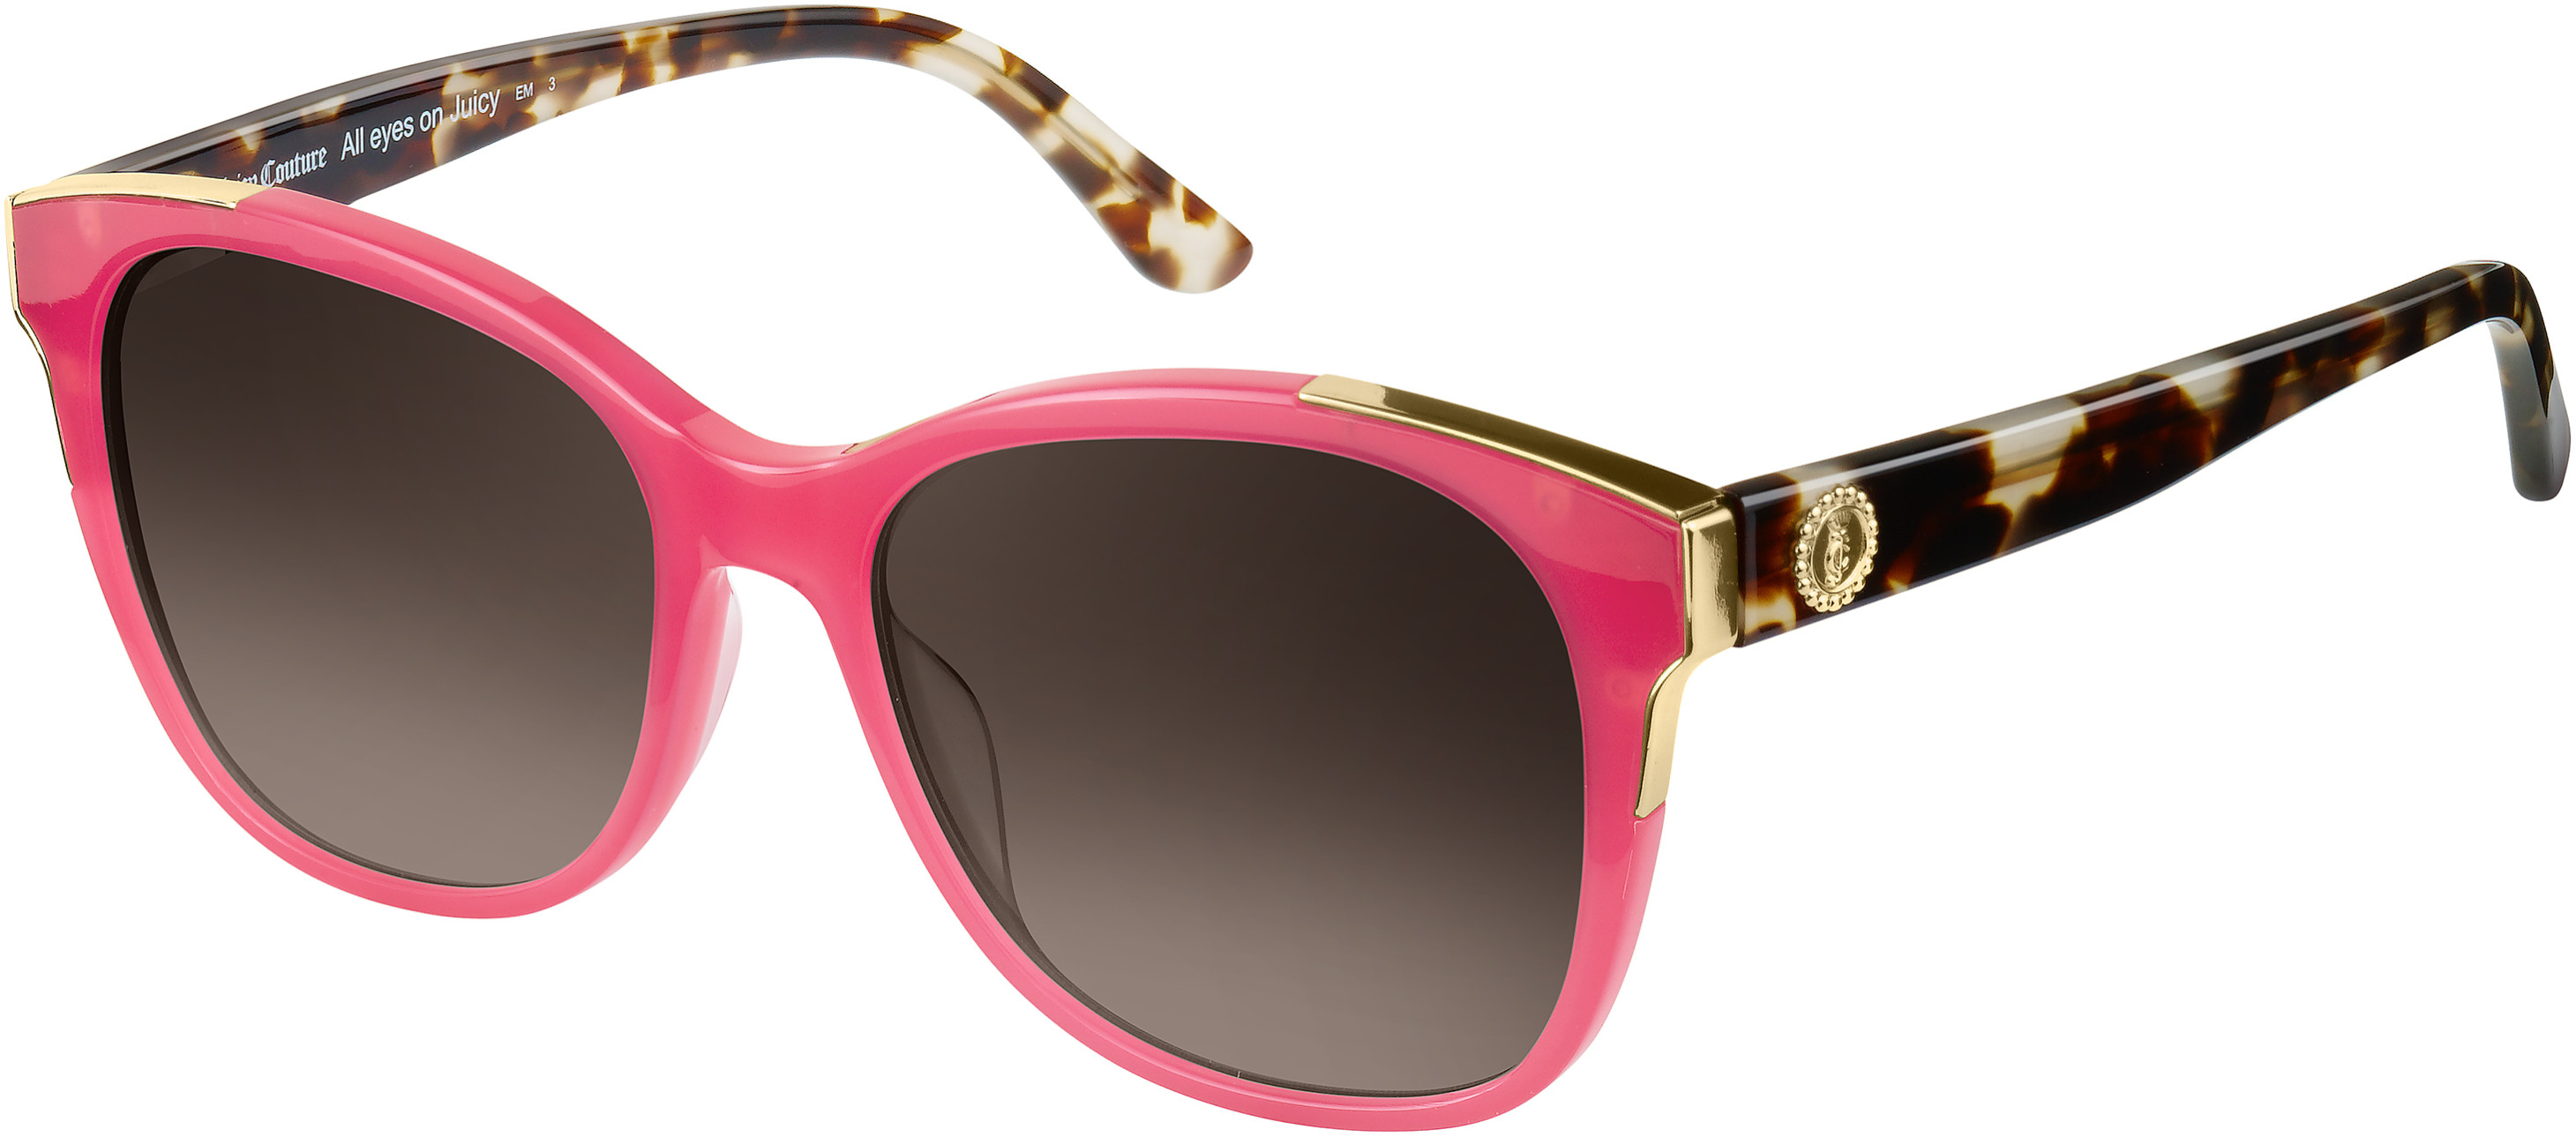 JUICY COUTURE 593